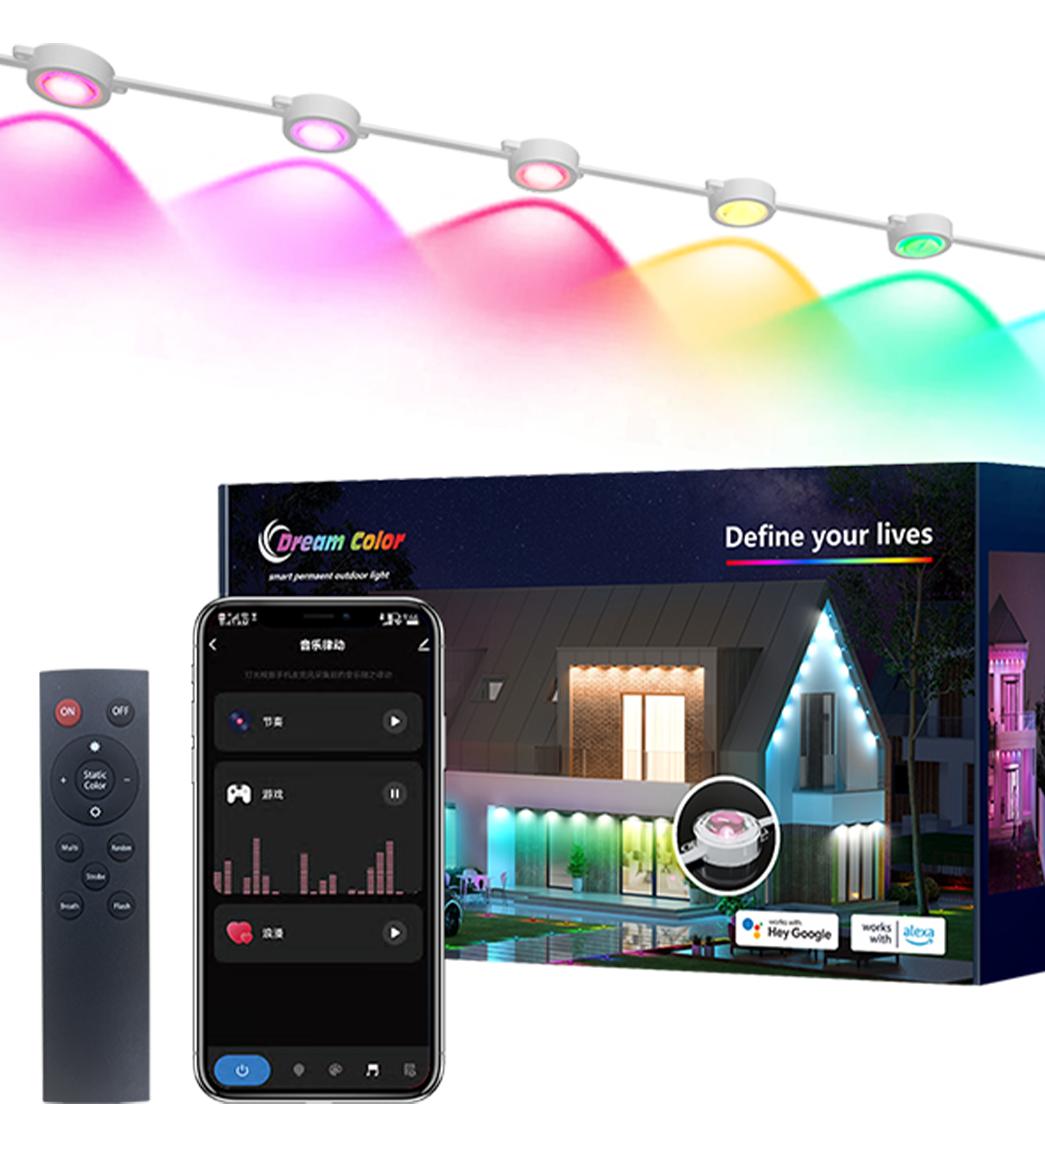 CL LIGHTING's Smart Christmas Lights: Helping You Make the Most of Your Holidays